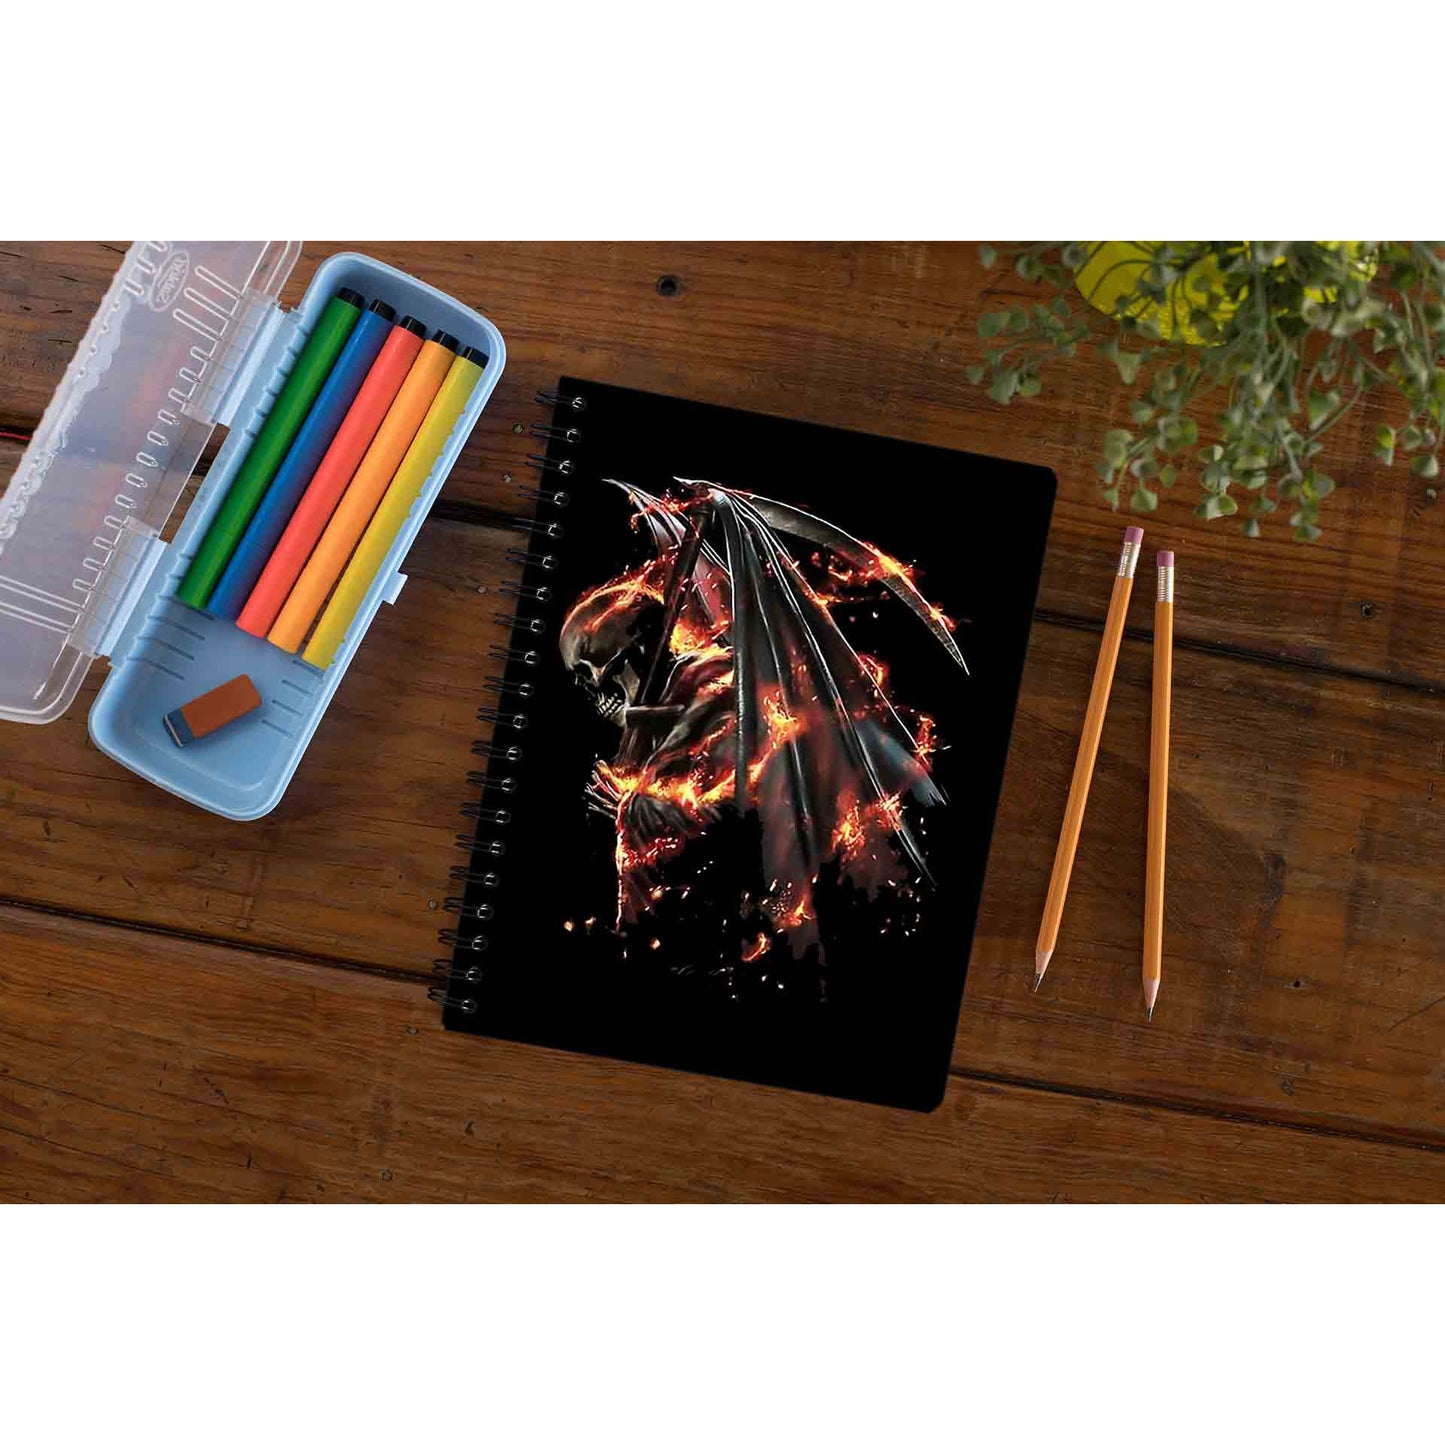 avenged sevenfold shepherd of fire notebook notepad diary buy online india the banyan tee tbt unruled